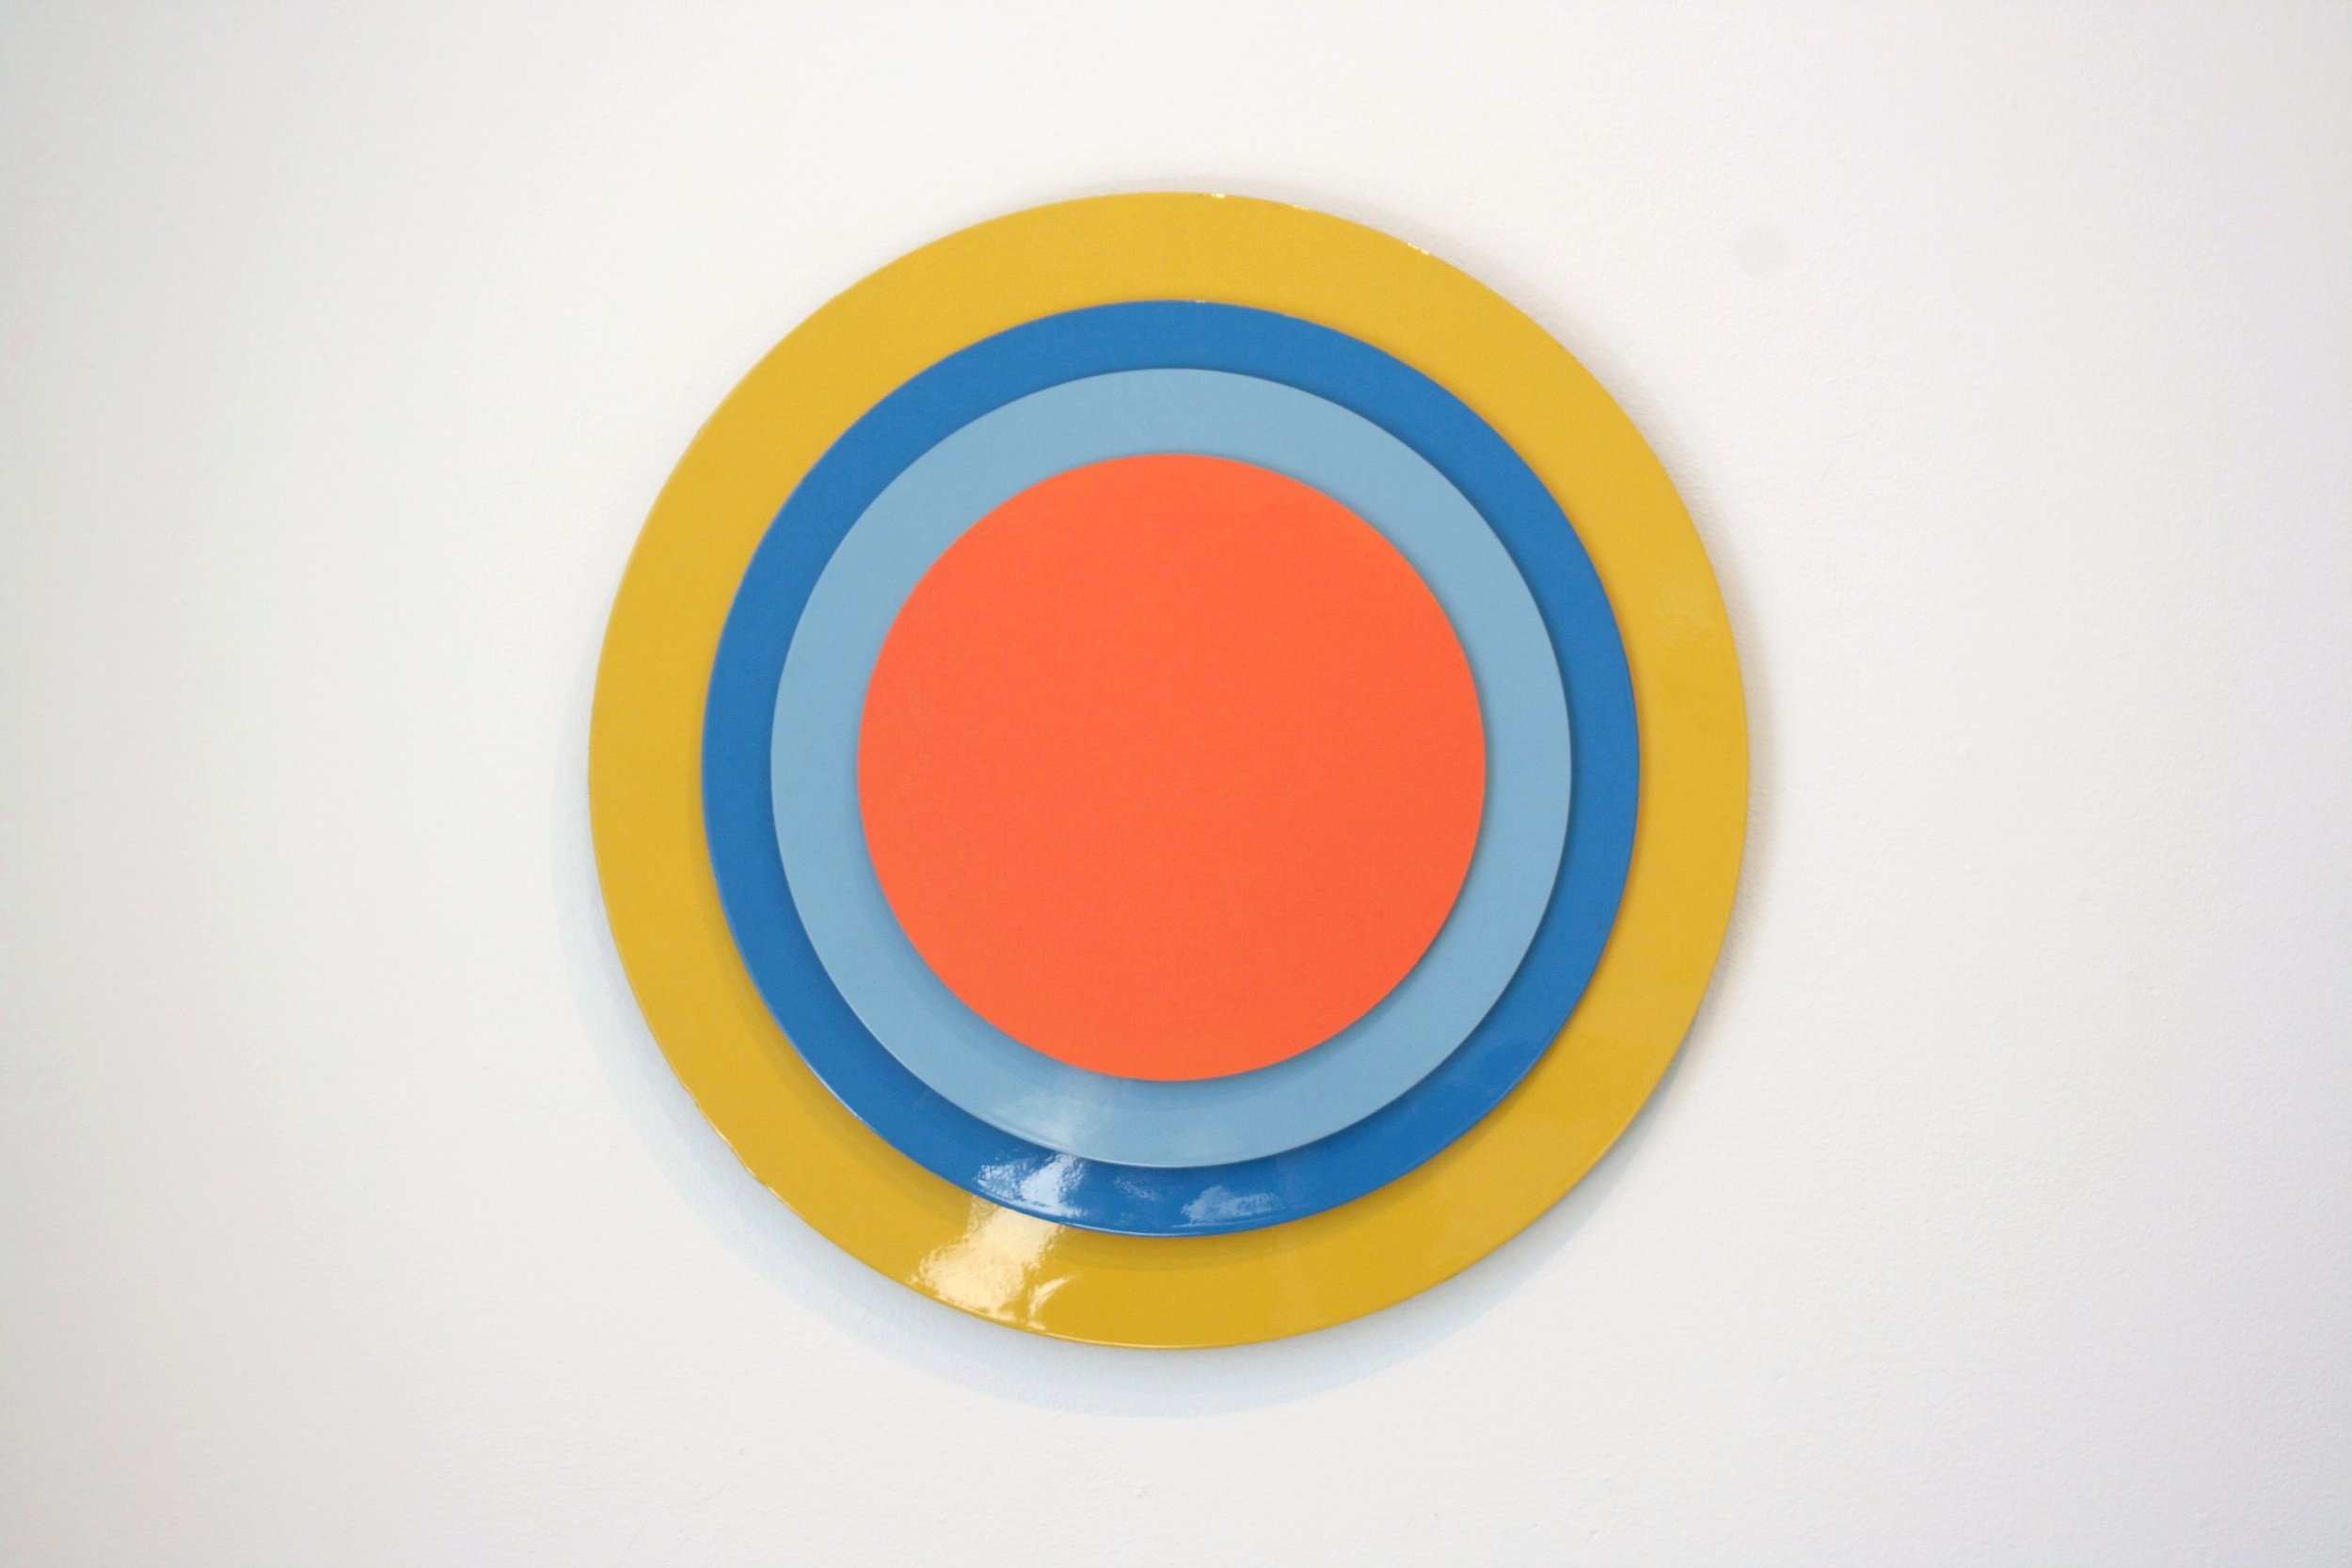   Surround,  2010 Lacquer on MDF, 50 cm in diameter  I See You , LNM, 2010 